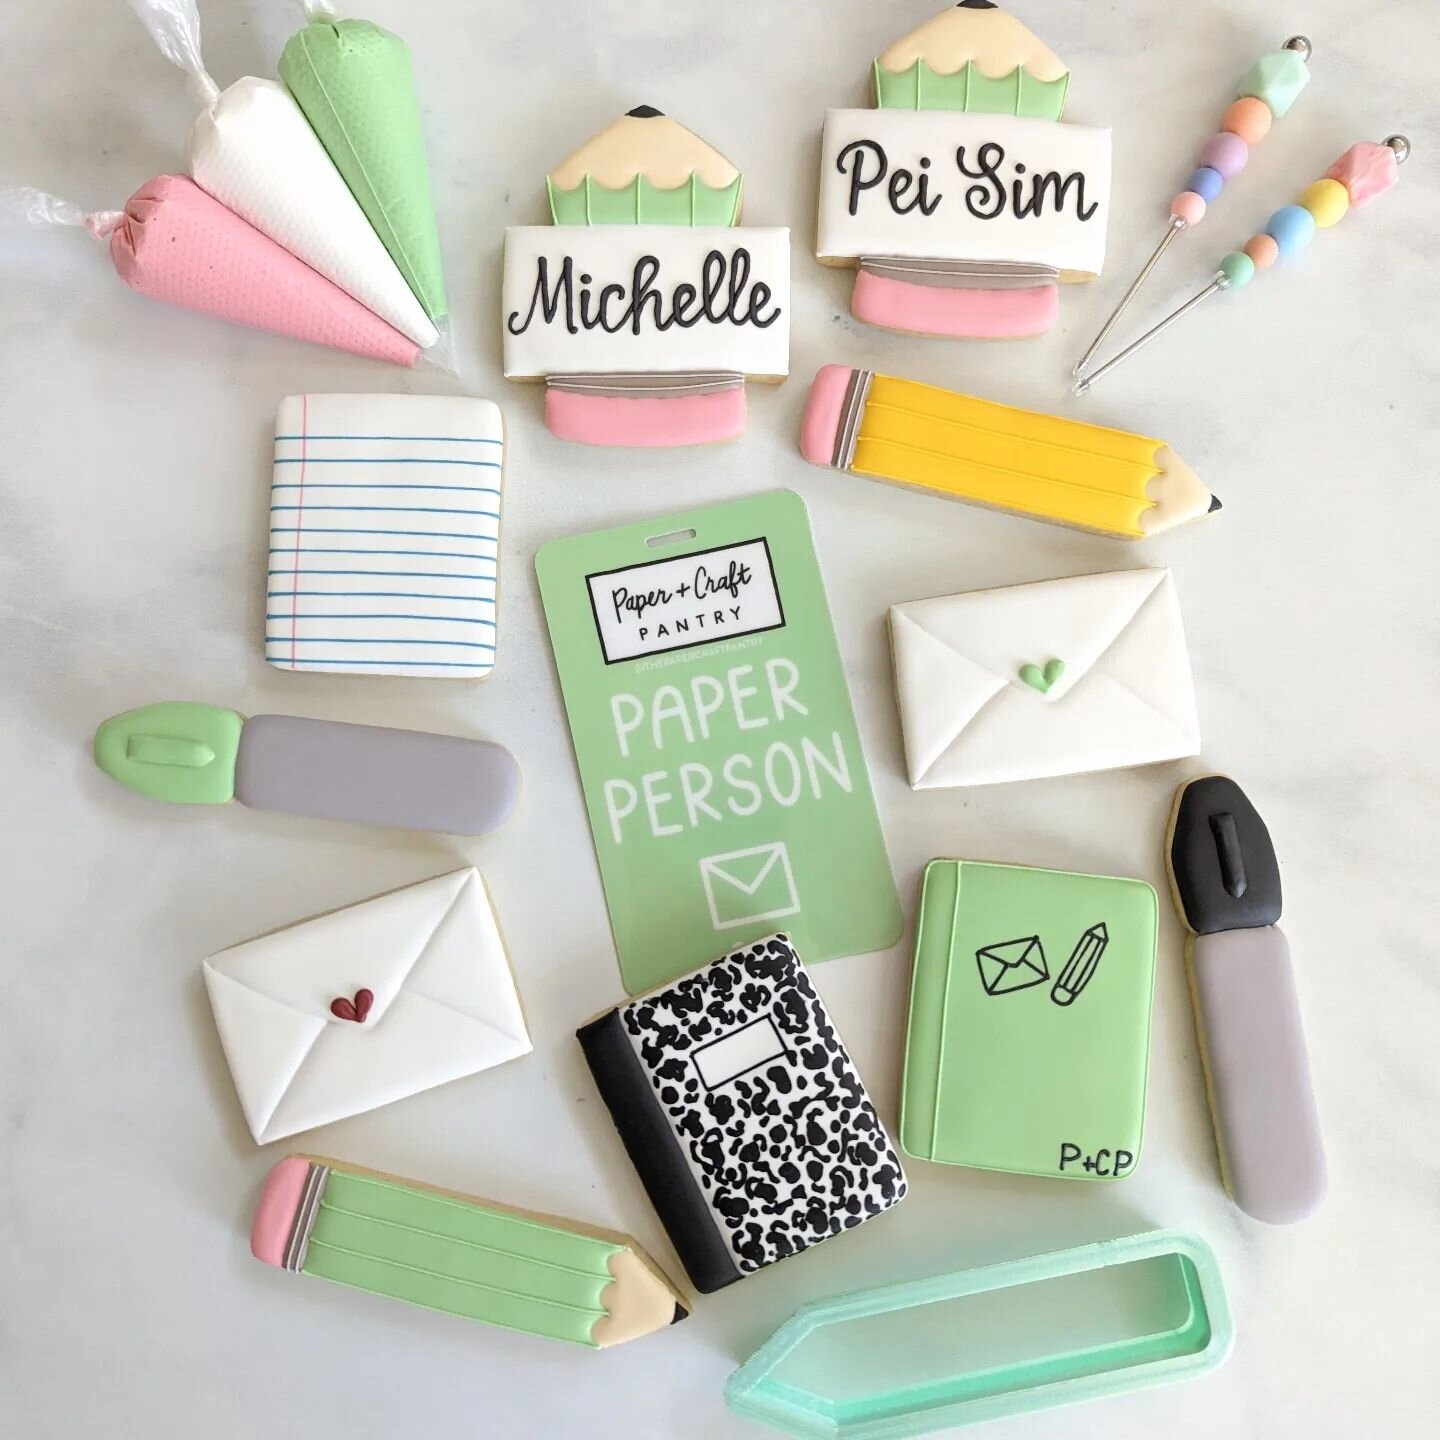 What are you doing on Saturday? Come celebrate Stationery Store Day @thepapercraftpantry and decorate these adorable #stationerycookies with me! Only one ticket left, make sure you grab it!